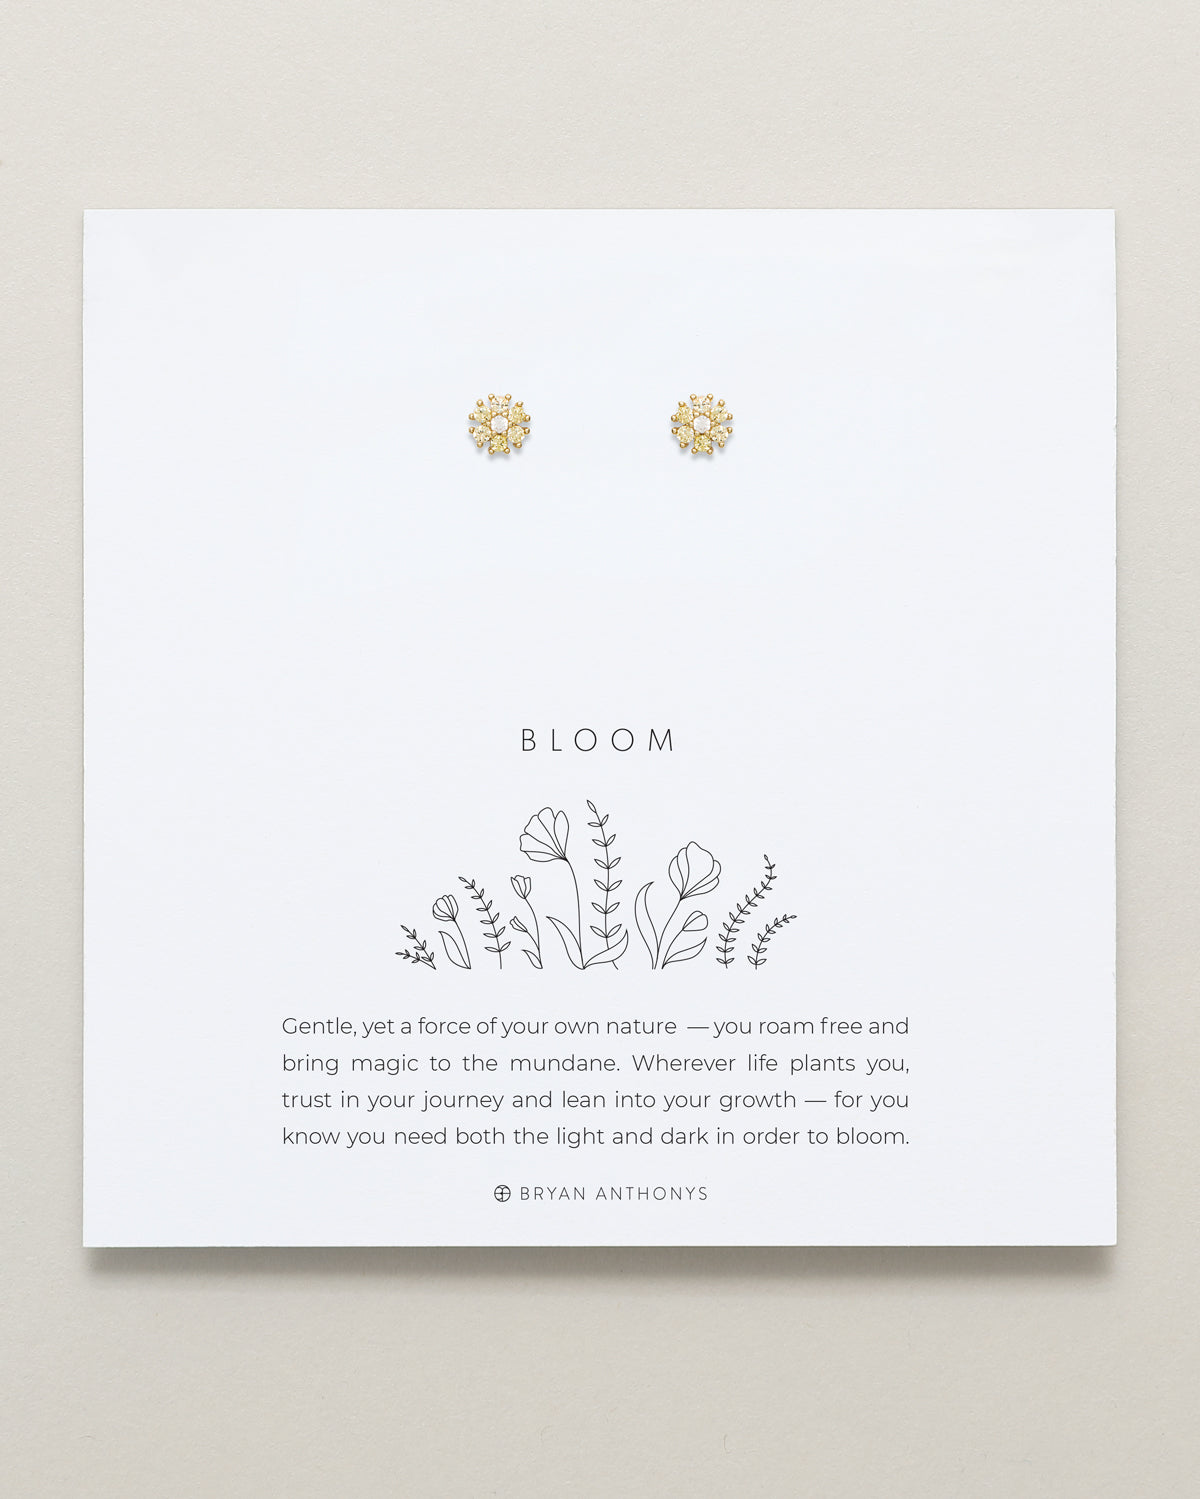 Bryan Anthonys Bloom Yellow Gold Stud Earrings On Card